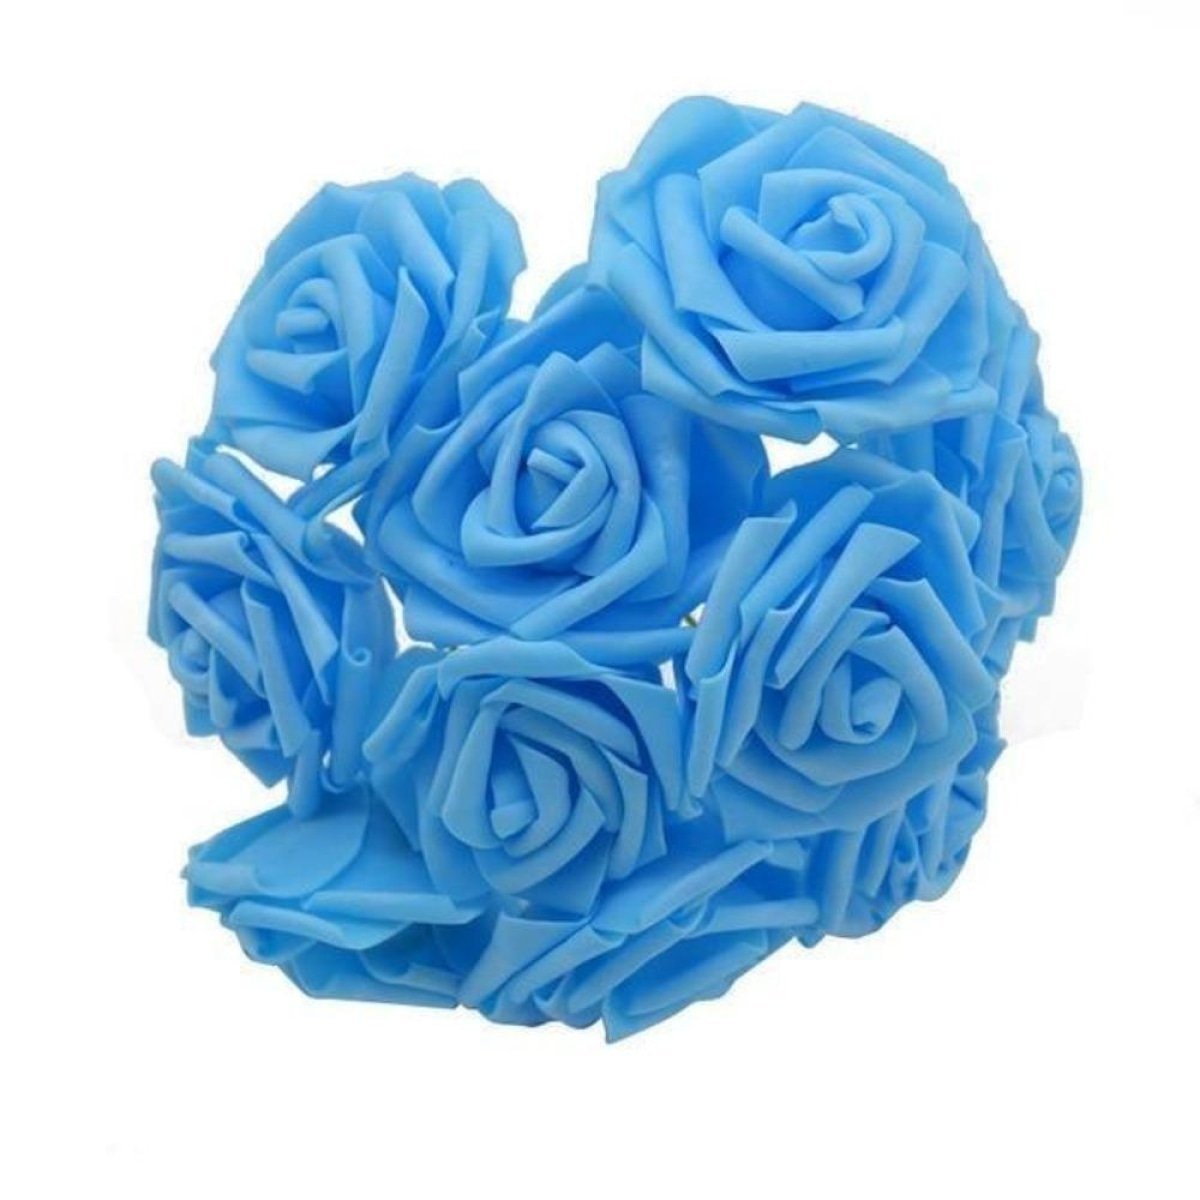 20pcs 7cm Artificial Flowers with Stems Foam Rose Fake Bride Bouquet Wedding - Light Blue - - Asia Sell